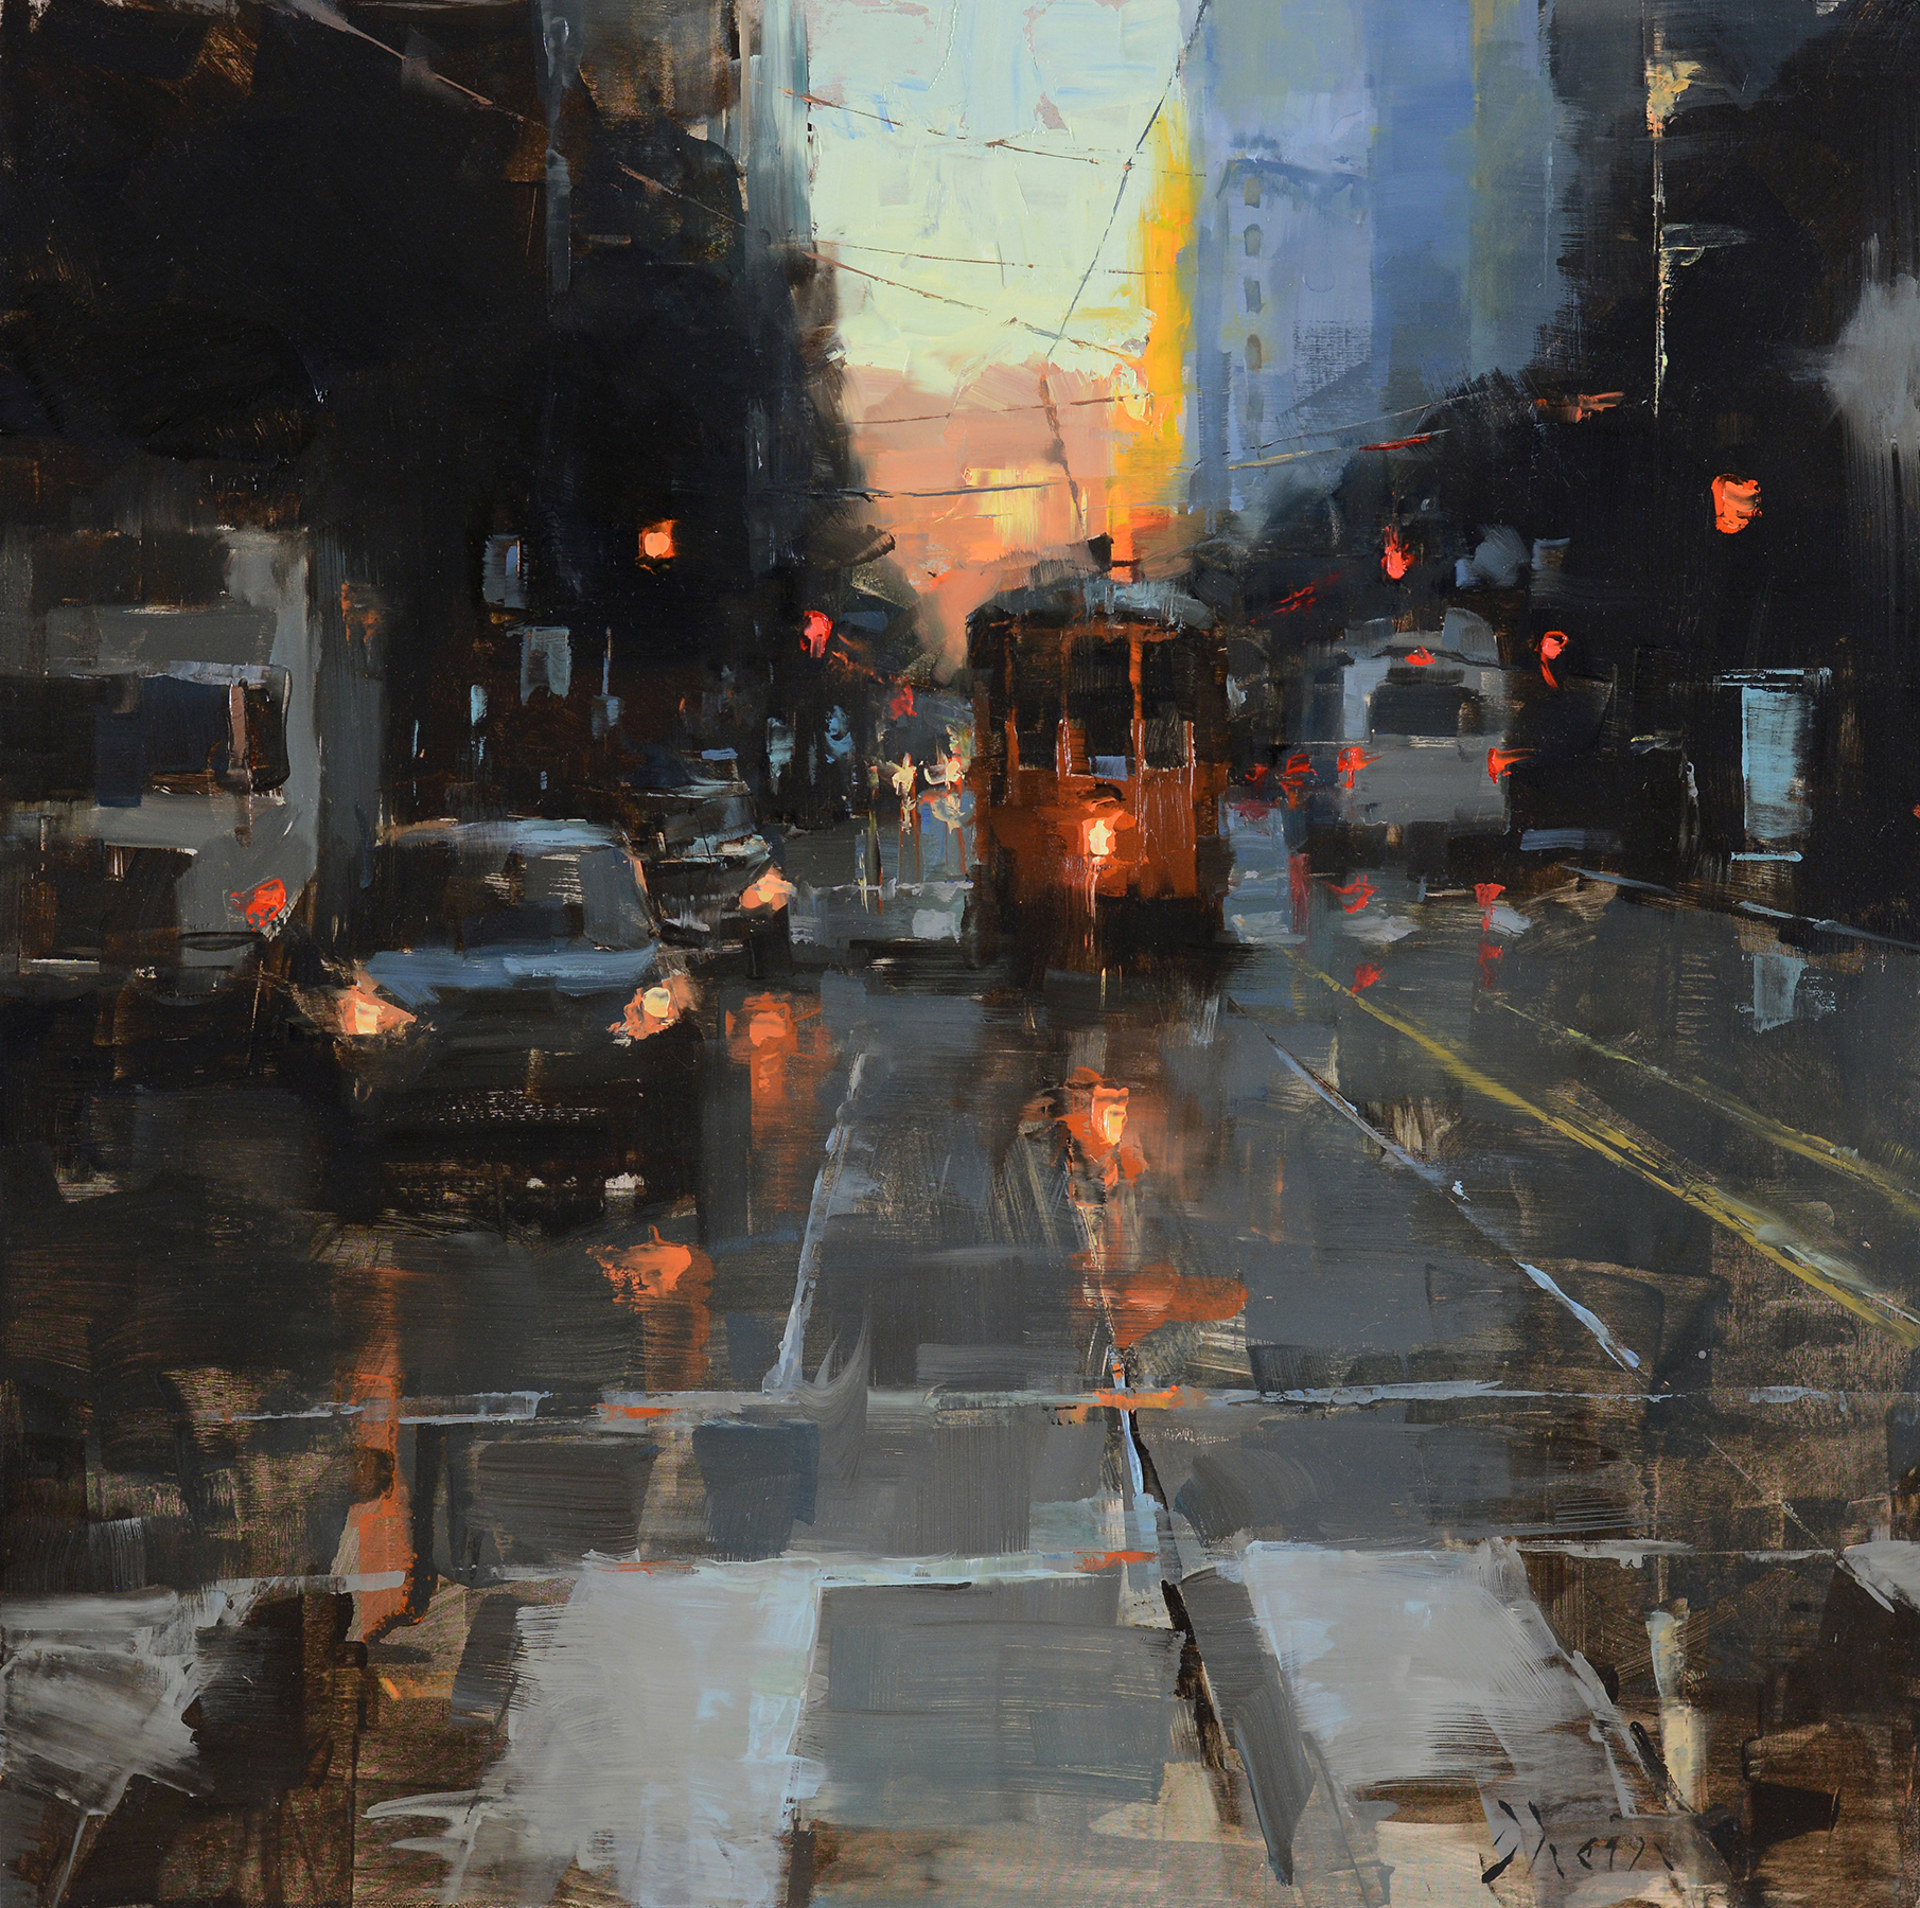 Morning Trolley on Market Street by Jacob Dhein